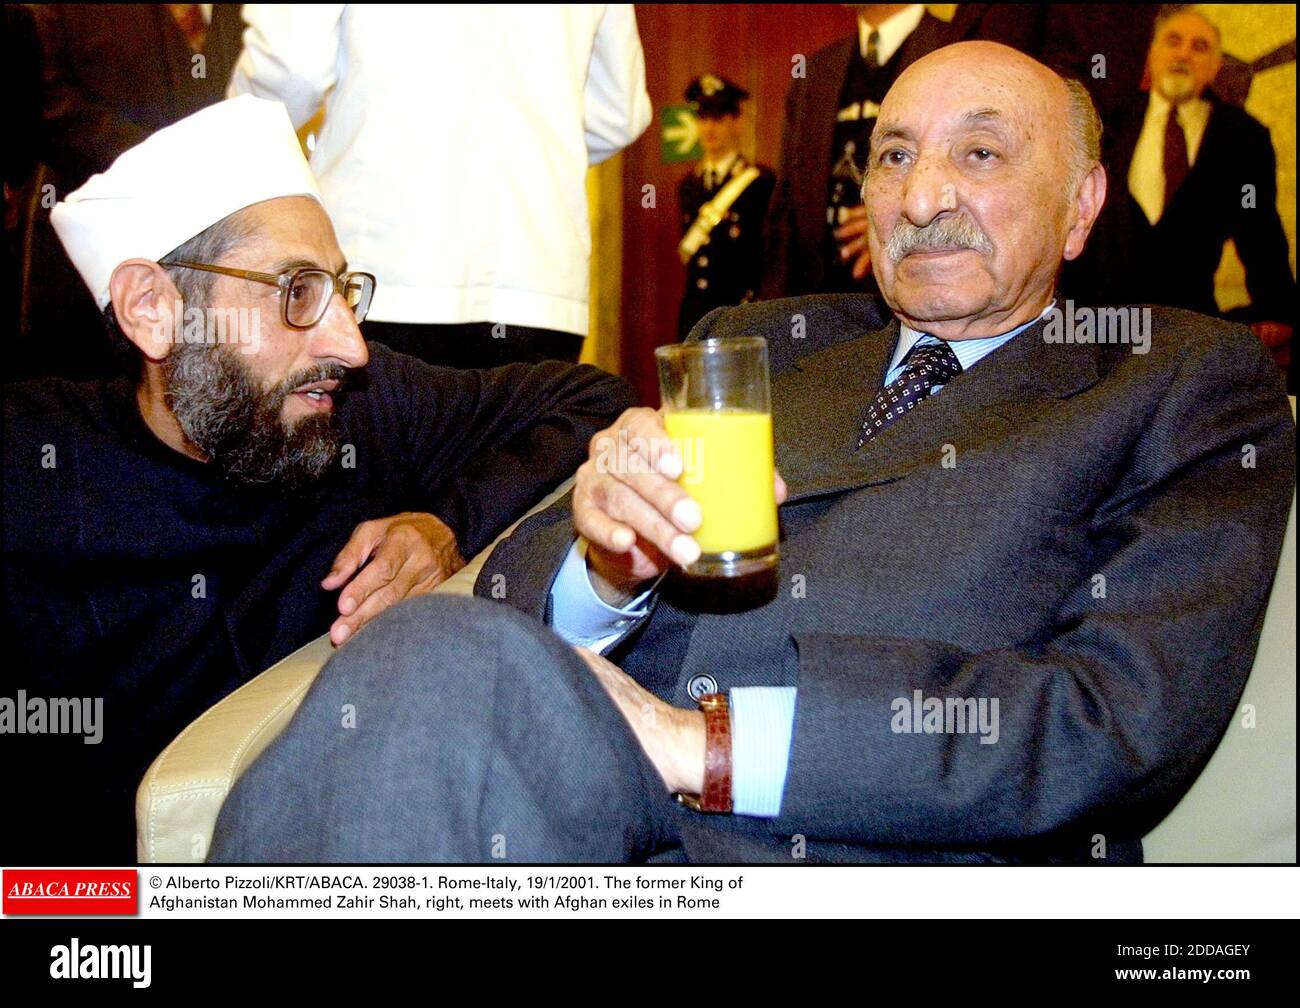 NO FILM, NO VIDEO, NO TV, NO DOCUMENTARY - © Alberto Pizzoli/KRT/ABACA. 29038-1. Rome-Italy, 29/1/2001. The former King of Afghanistan Mohammad Zahir Shah, right, meets with Afghan exiles in Romence rights only Stock Photo